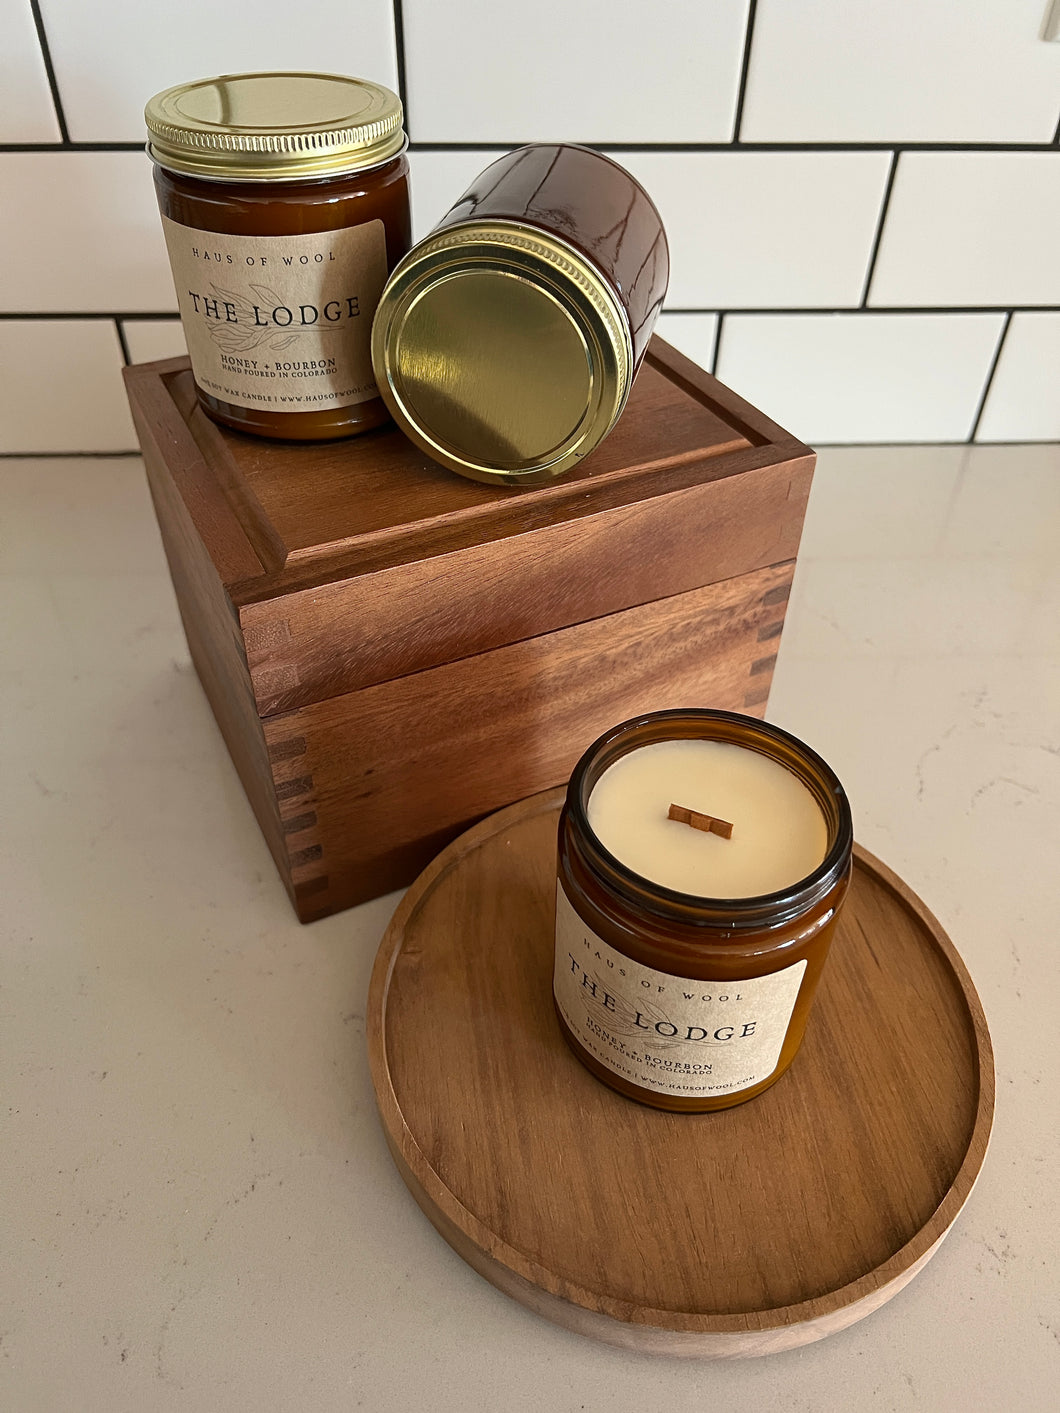 The Lodge: Honey + Bourbon Soy Wax Glass Vessel Candle